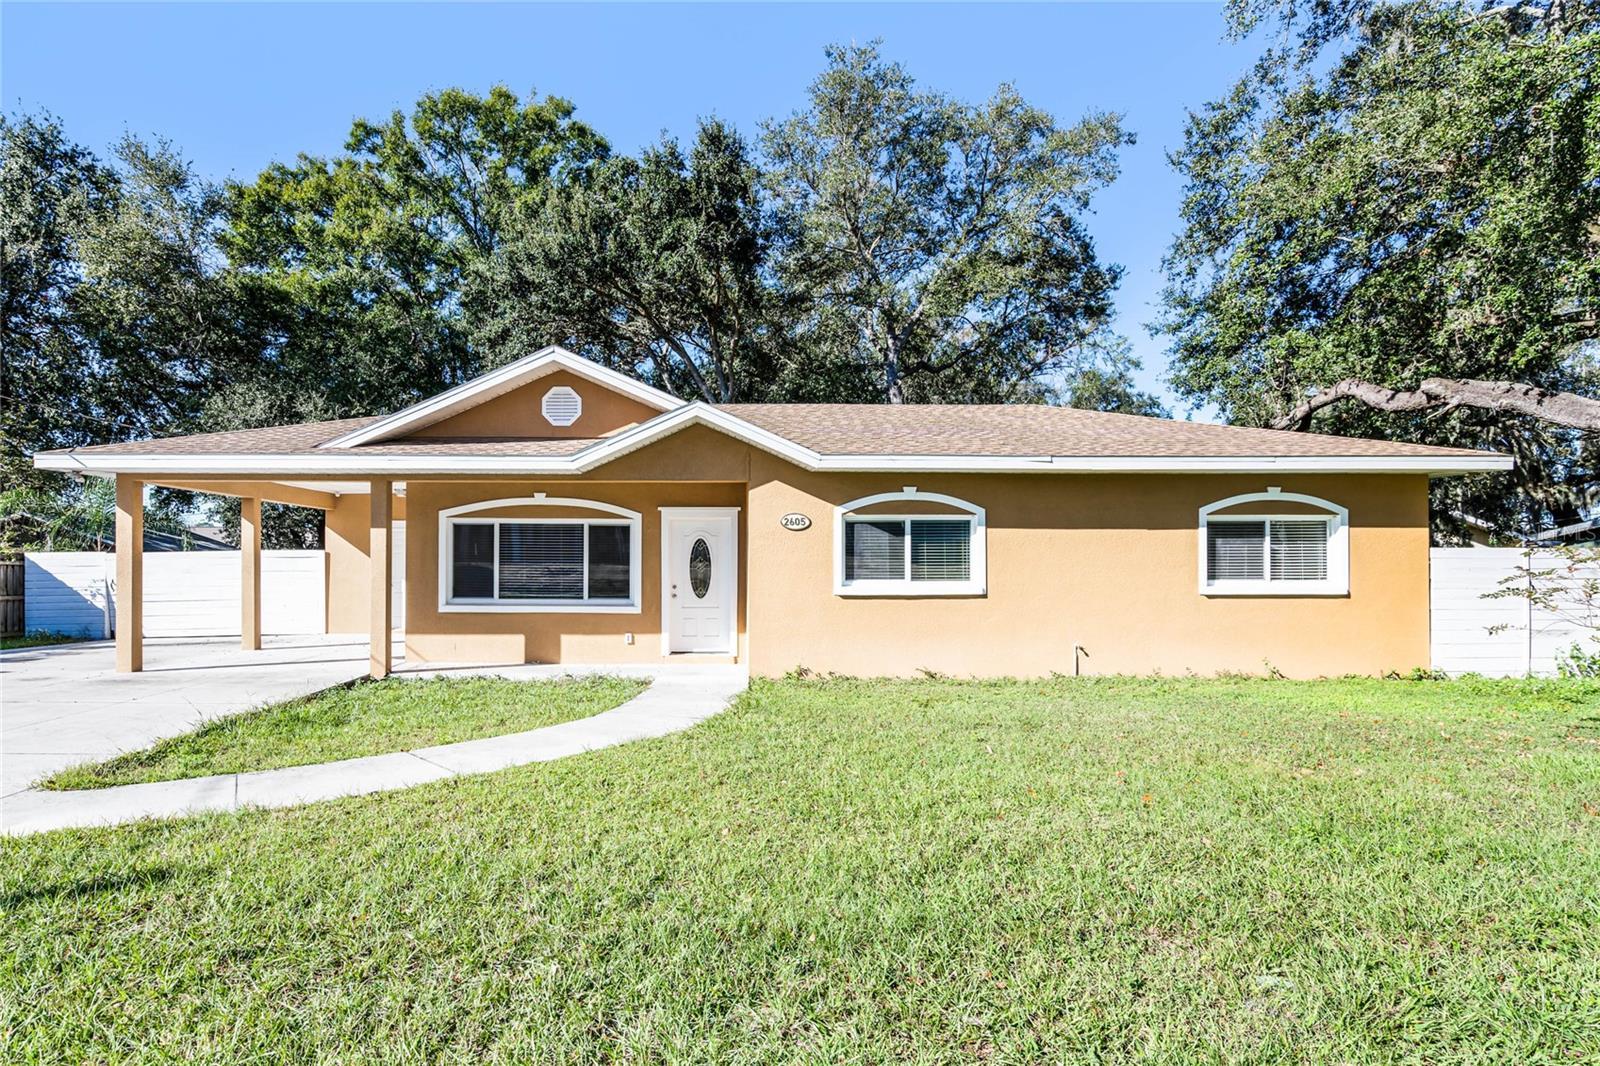 Photo one of 2605 S Lincoln Ave Lakeland FL 33803 | MLS G5076620